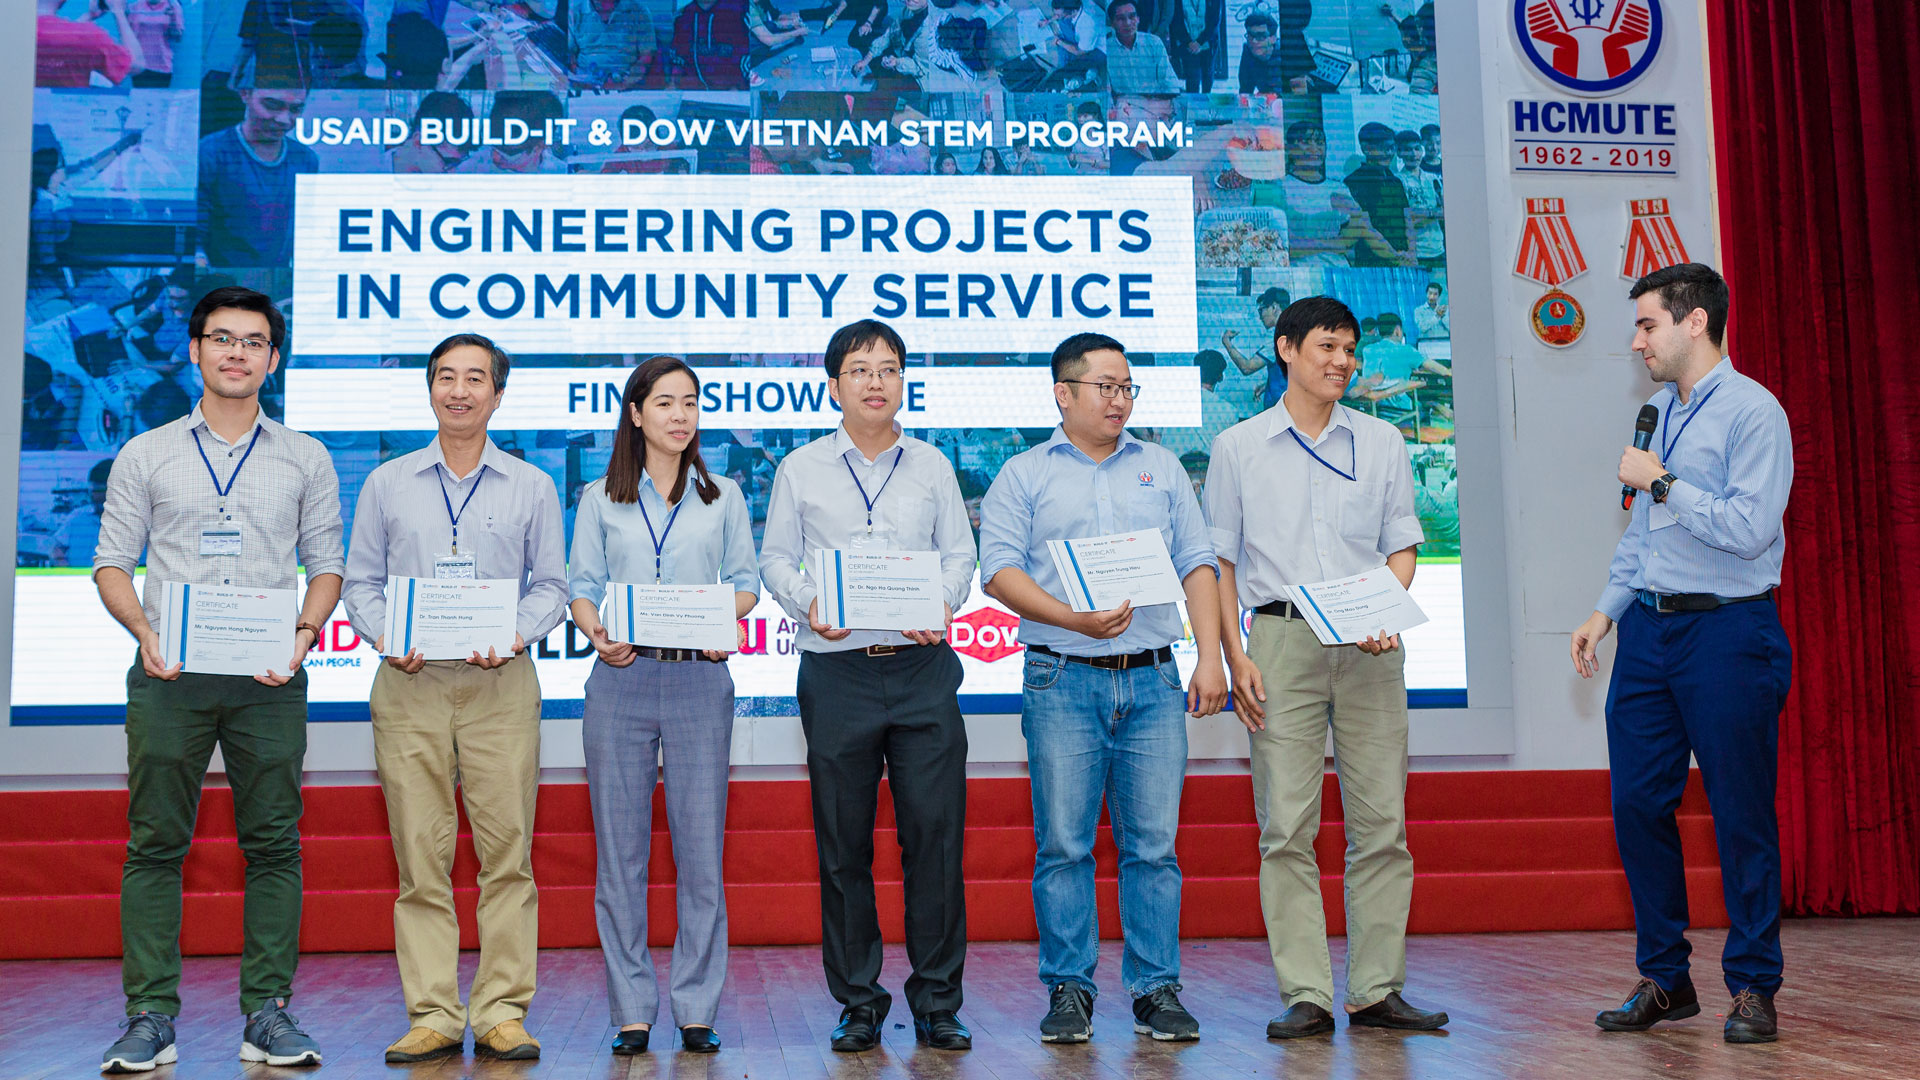 ALT TEXT: Van Dinh Vy Phuong (pictured third from left) participates with her teammates in the final showcase of the Engineering Projects in Community Service program, also known as EPICS.